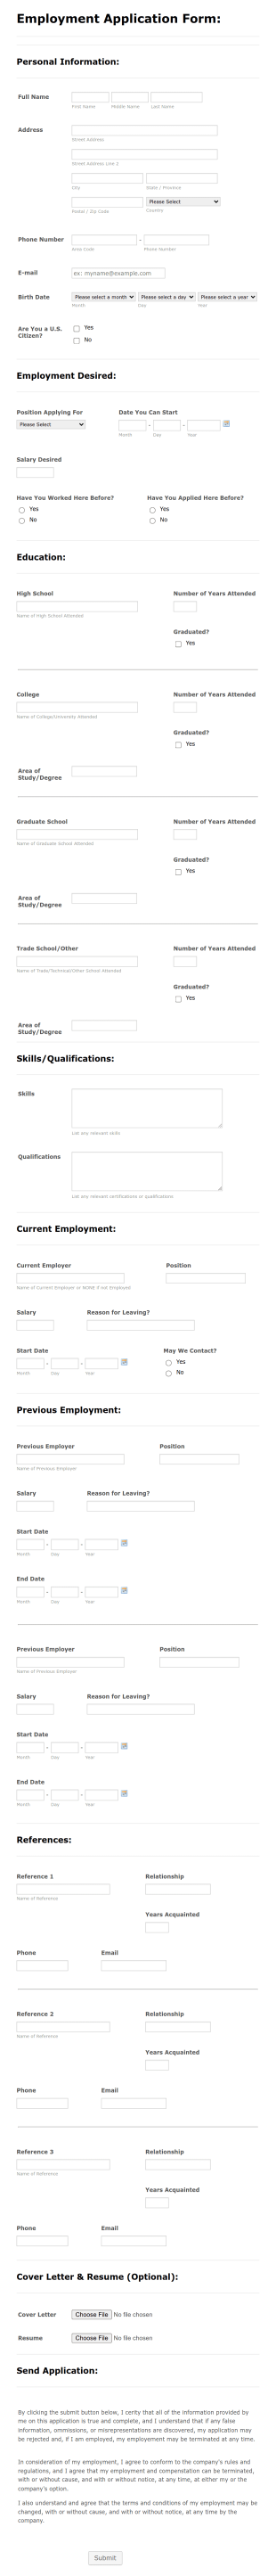 Labor Application Form Template